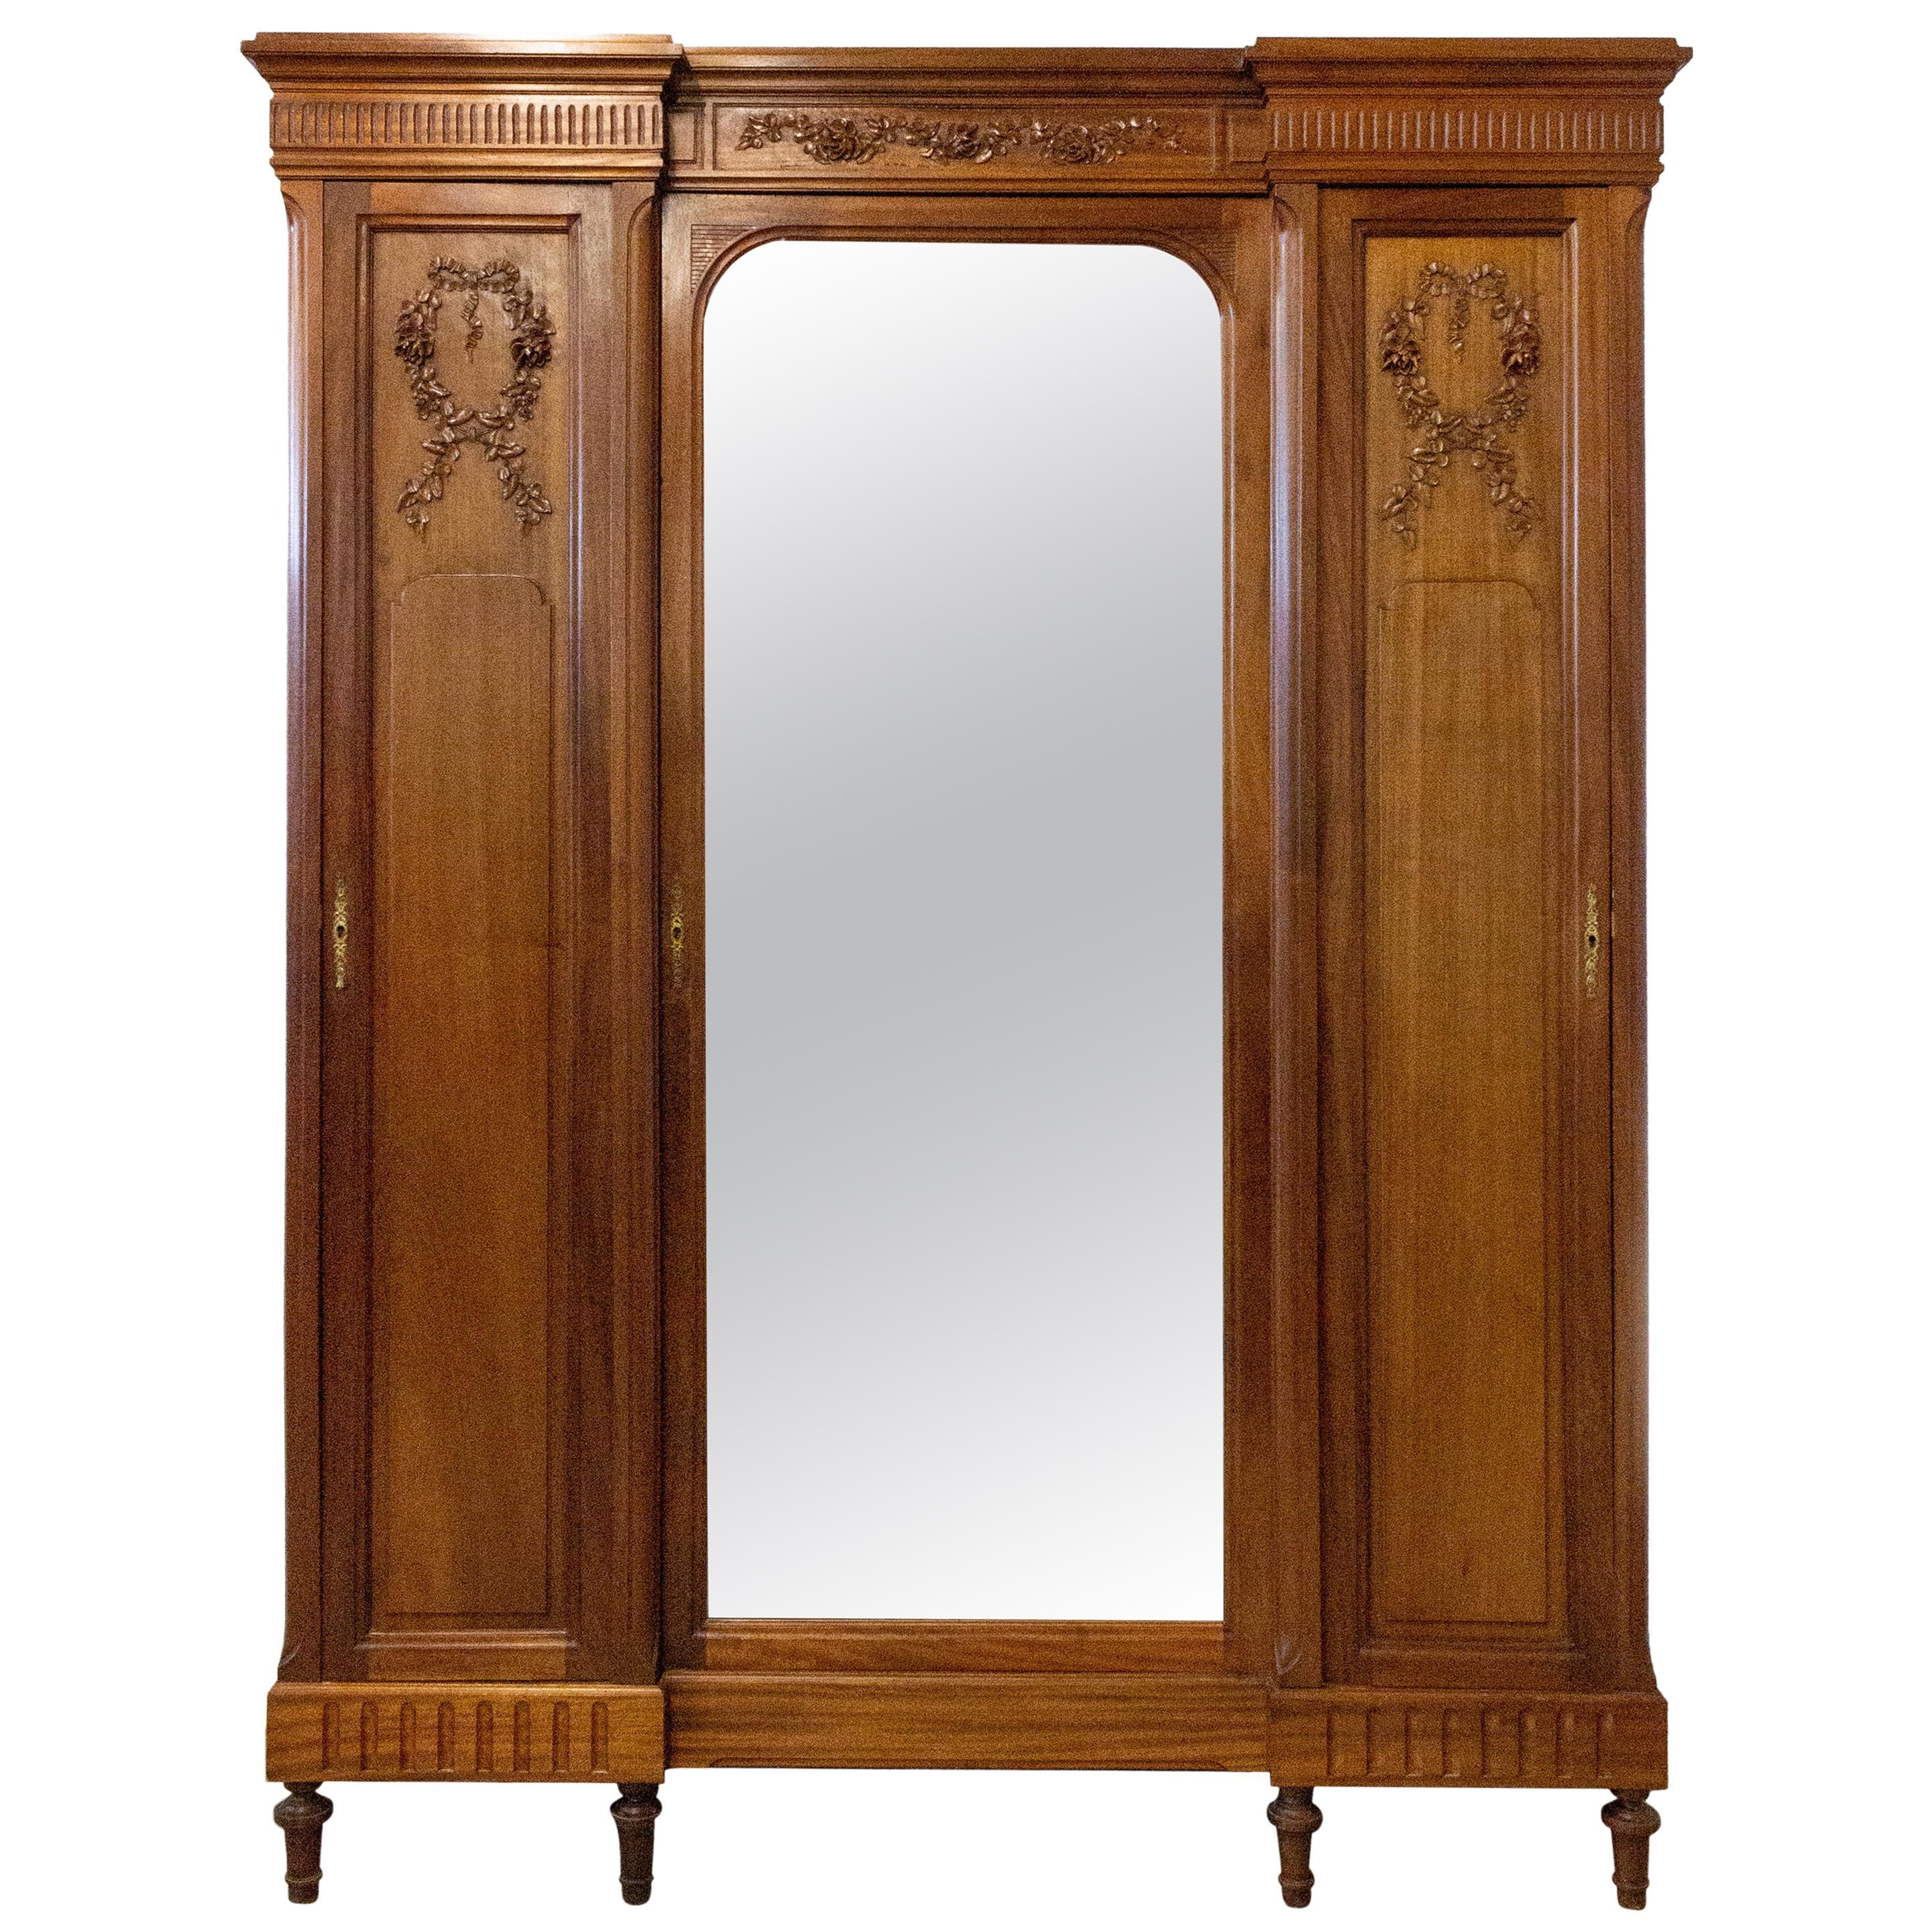 French Armoire Louis Xvi Mirror Door Exotic Wood Wardrobe, 1900 For Sale At  1stdibs | Antique Wardrobe Armoire With Mirror, Mirror Door Armoire, Antique  Armoire With Mirror Pertaining To Vintage French Wardrobes (View 13 of 15)